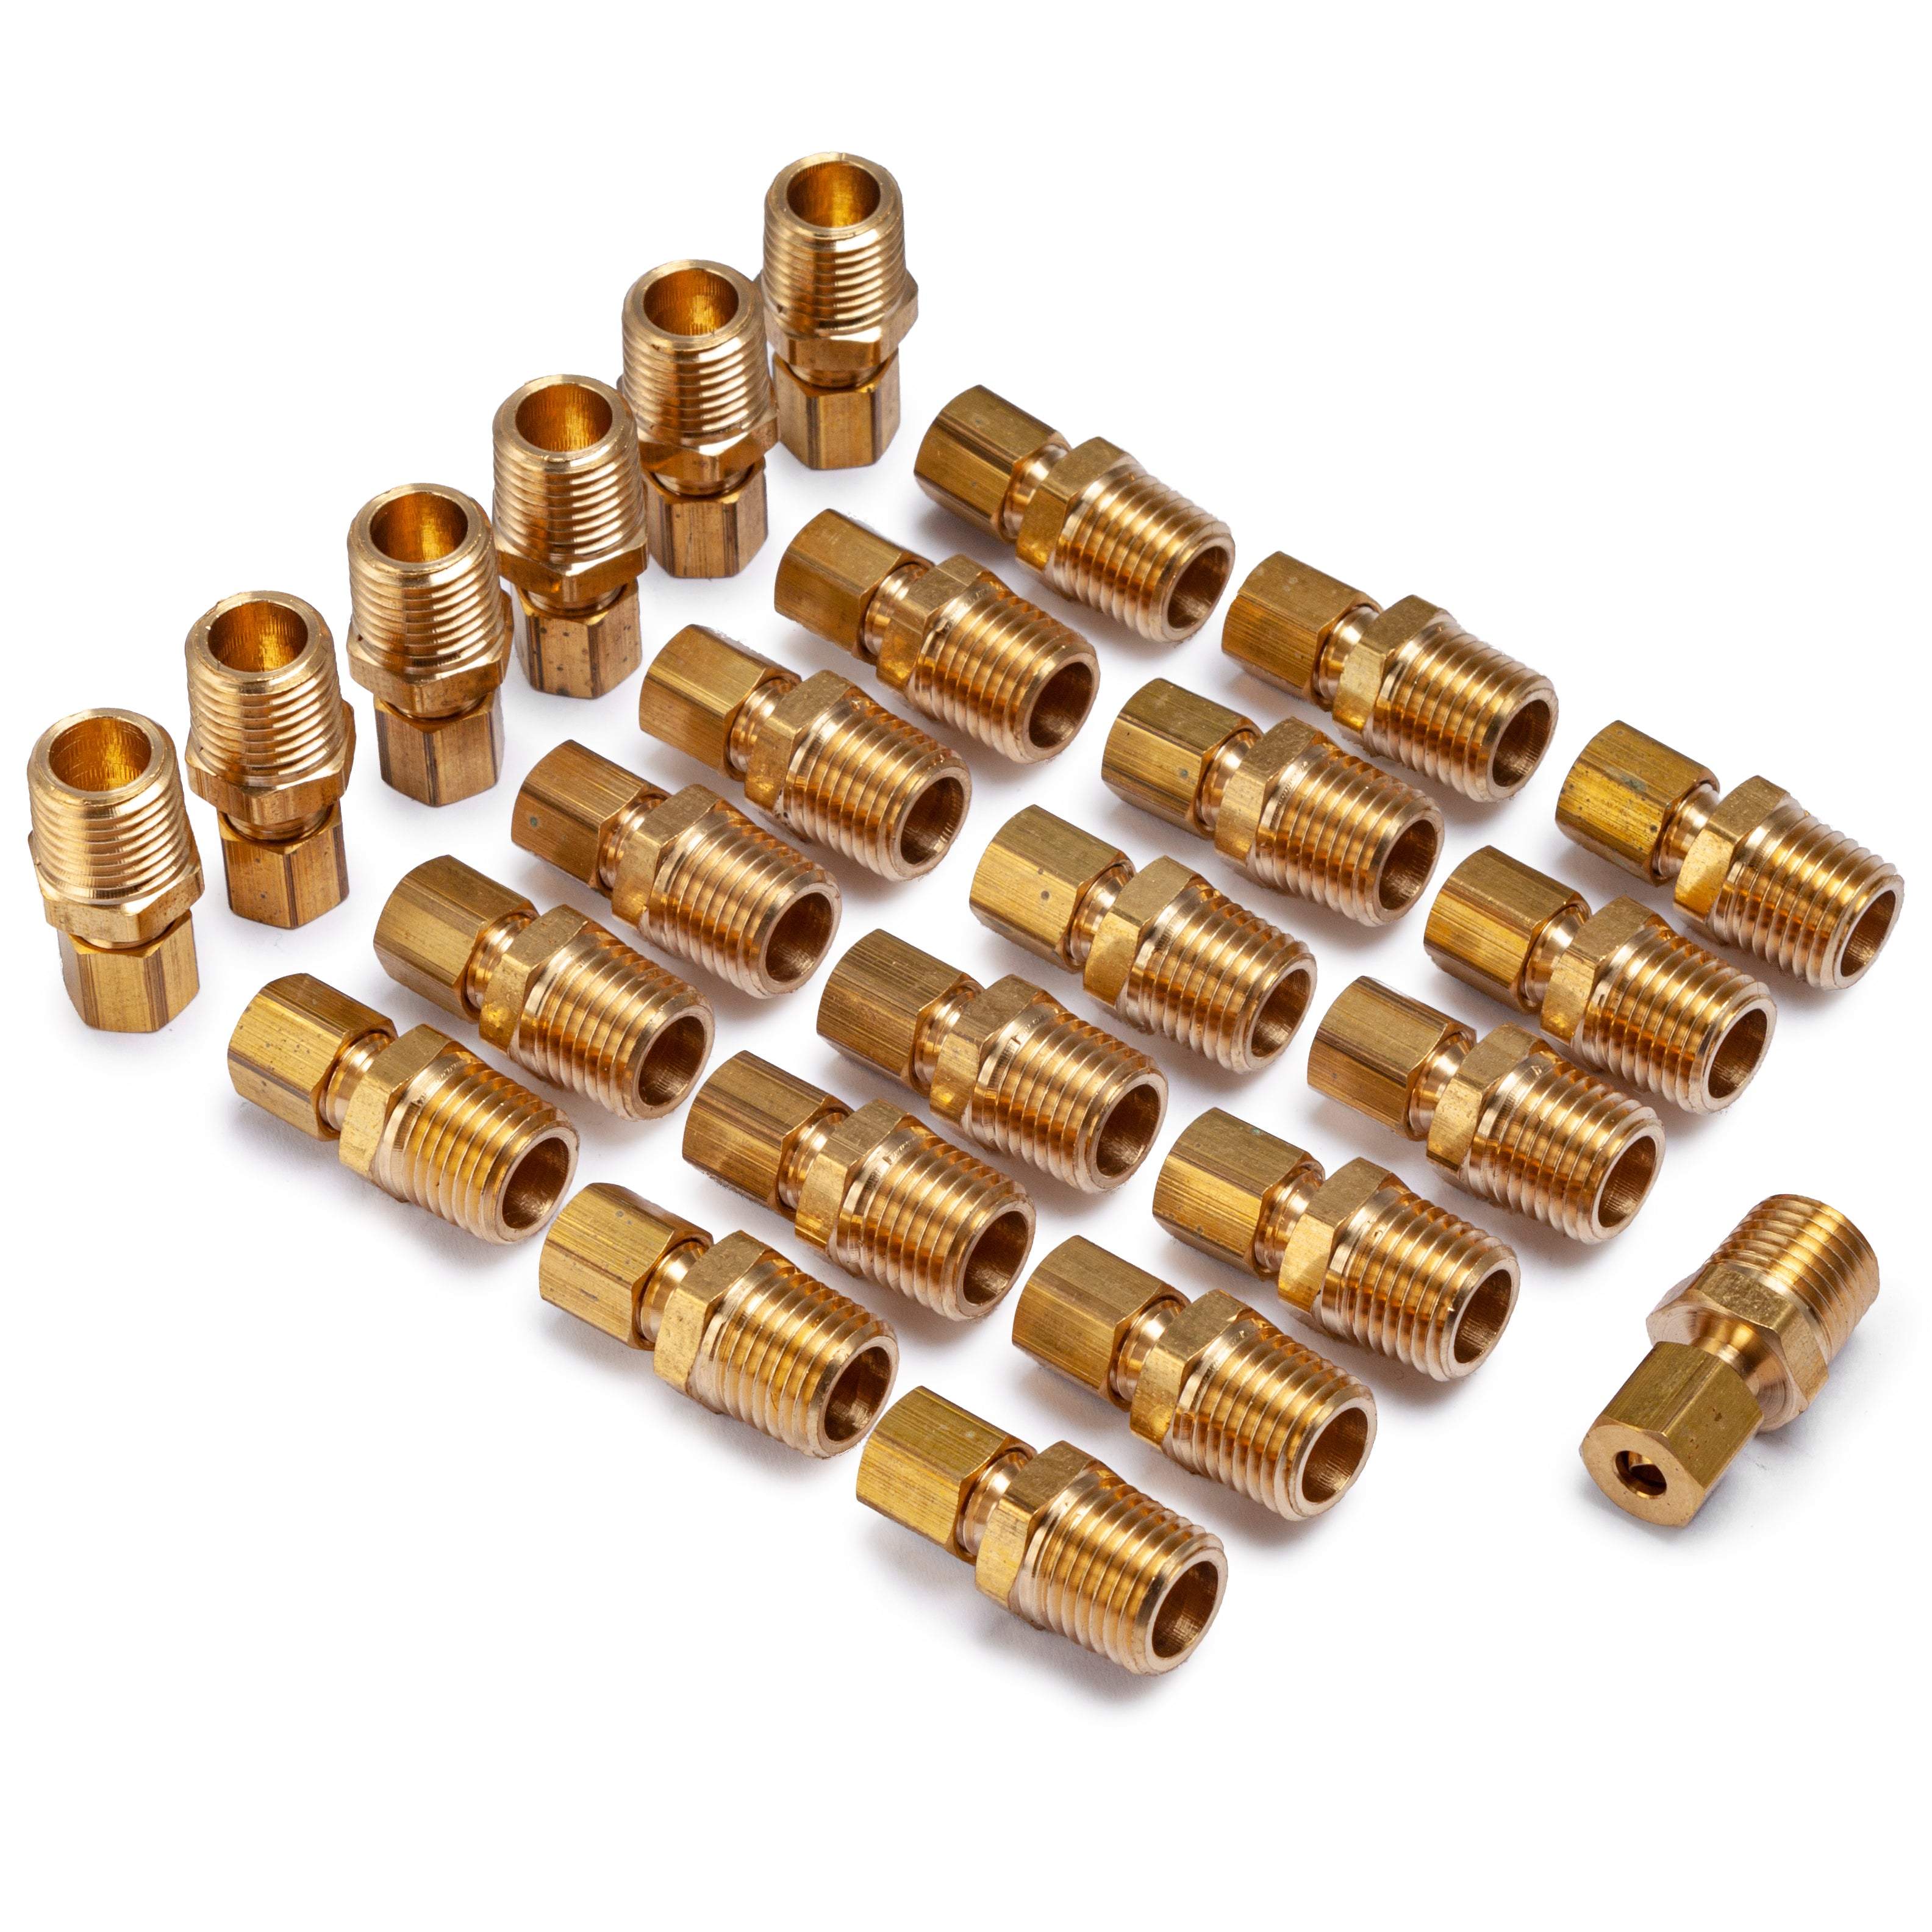 LTWFITTING Brass 3/16 OD x 1/4 Male NPT Compression Connector Fitting(Pack of 25)